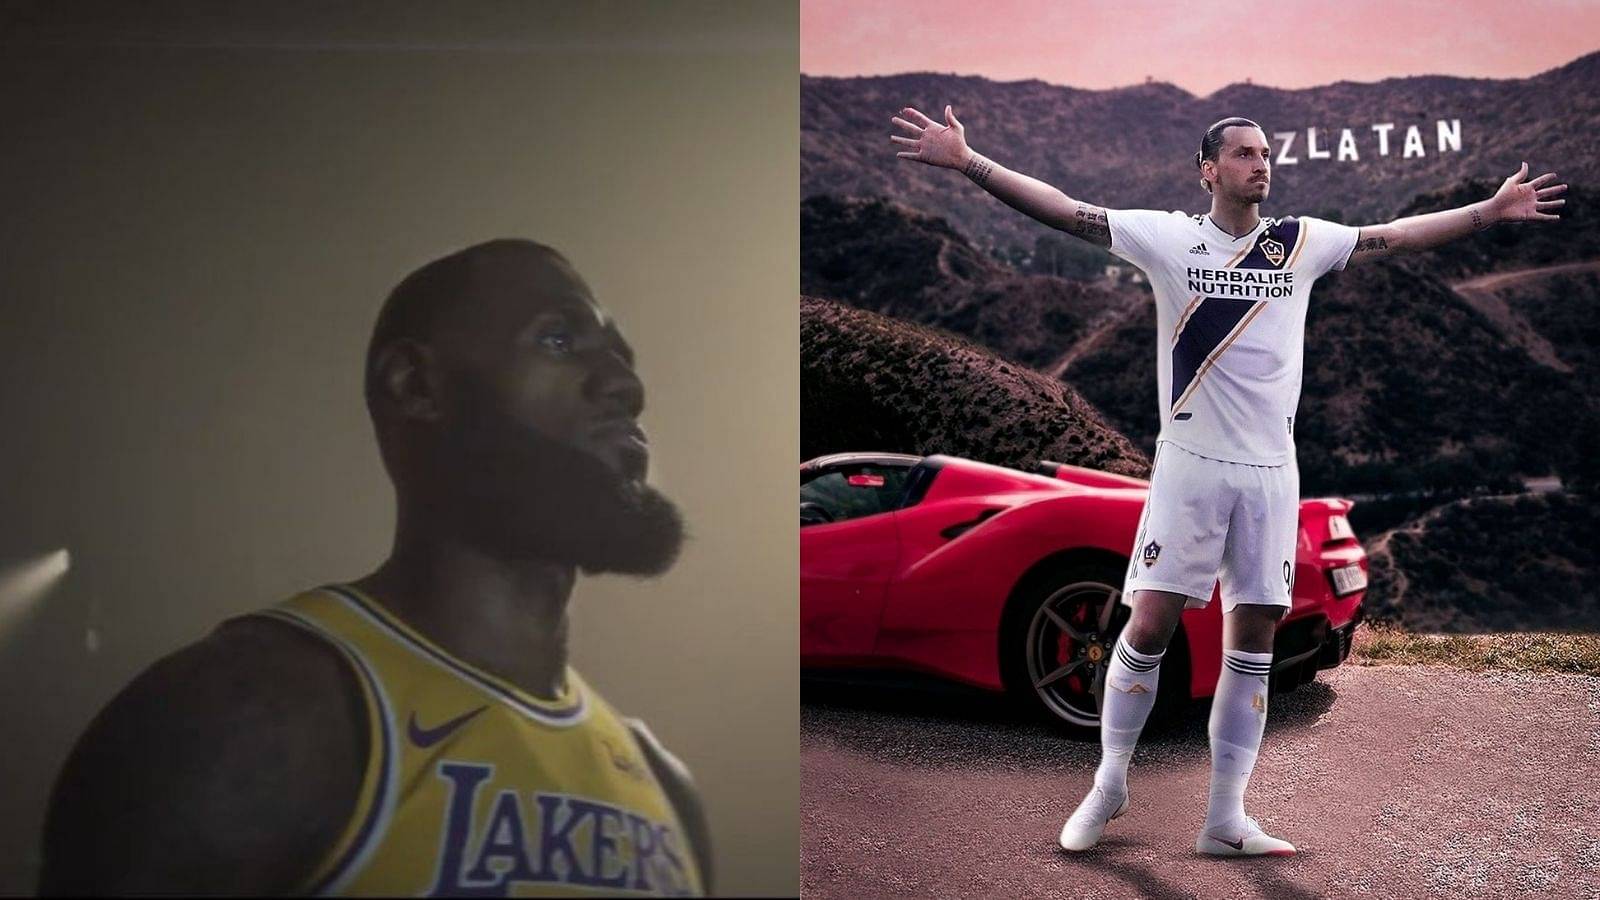 “Welcome LeBron James, now LA has a God and a King”: When Zlatan Ibrahimovic punked Lakers star, sending him his gifted jersey back with an autograph